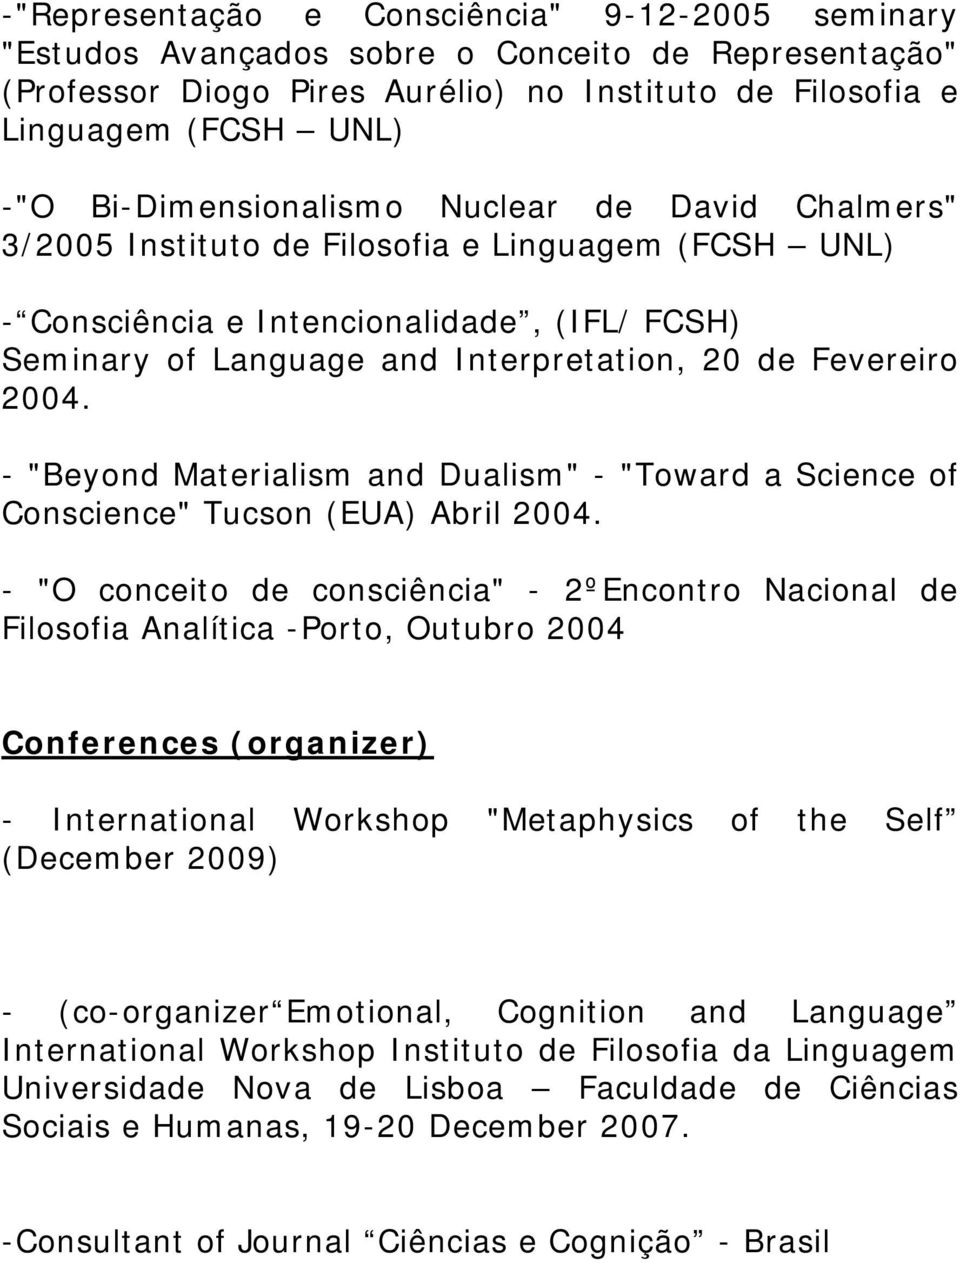 Fevereiro 2004. - "Beyond Materialism and Dualism" - "Toward a Science of Conscience" Tucson (EUA) Abril 2004.